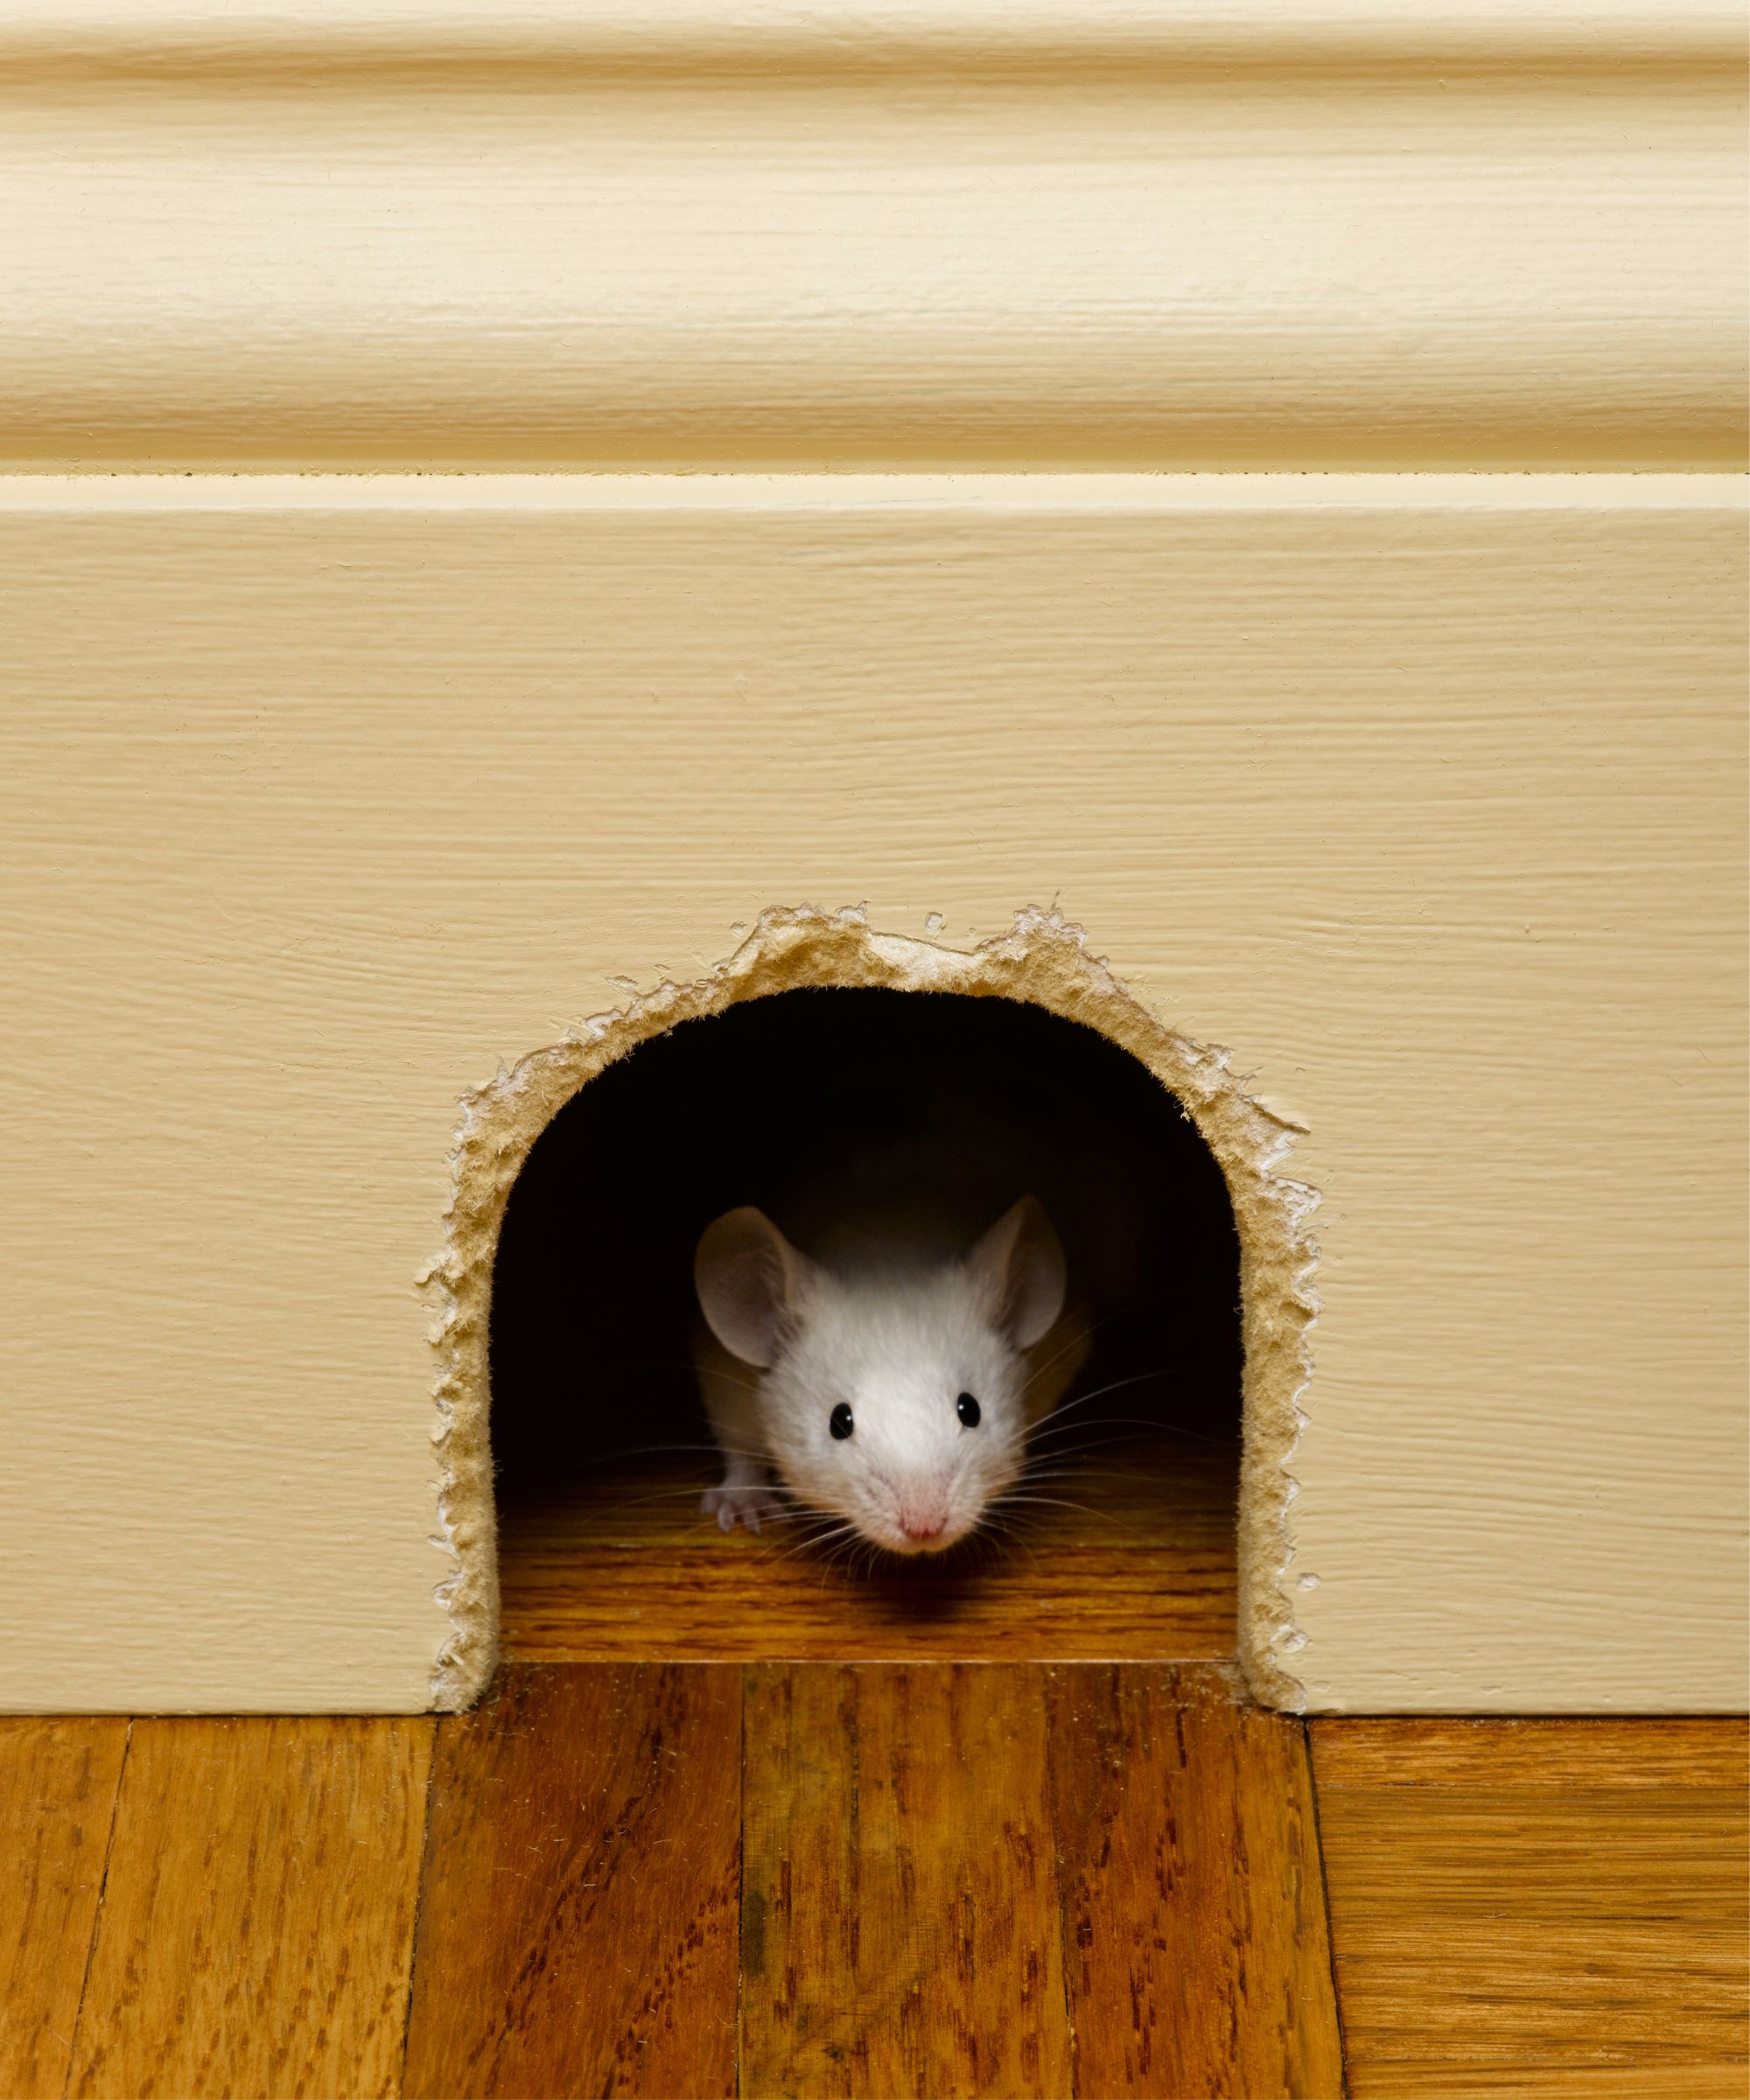 Mouse peeking out of mouse hole